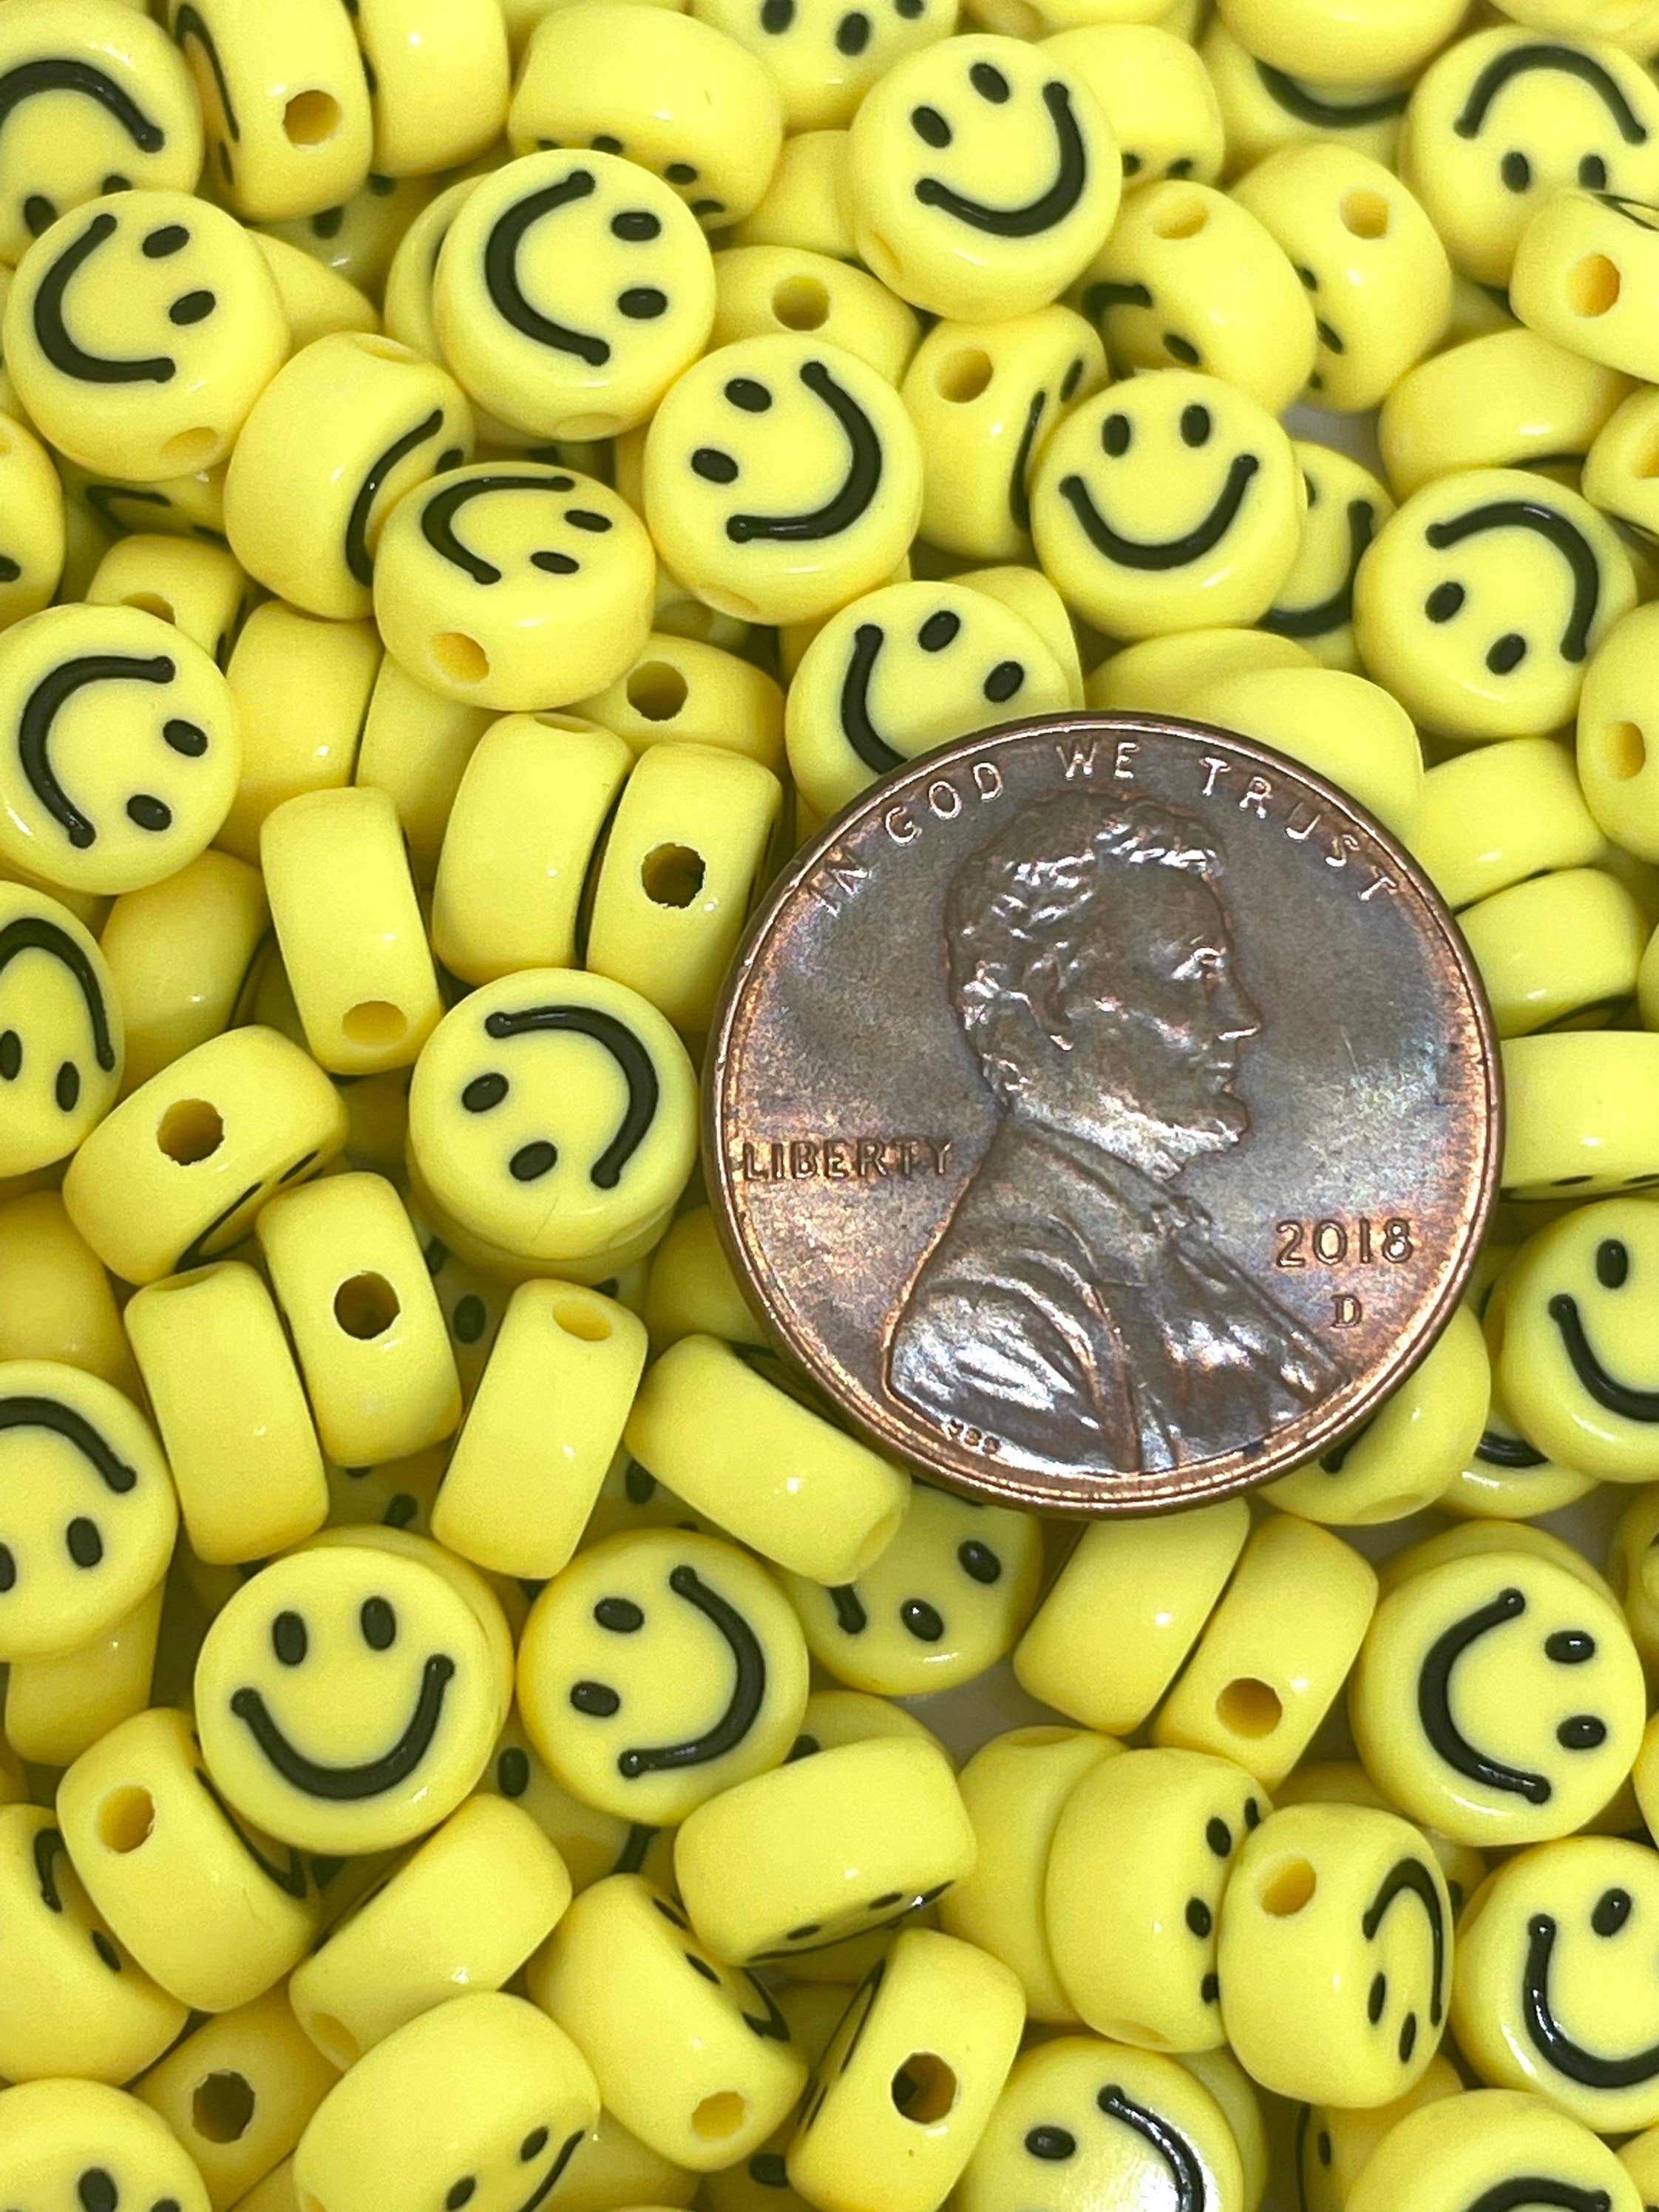 SMOL Yellow Smiley Face Beads, Charms for Bracelet, Necklace